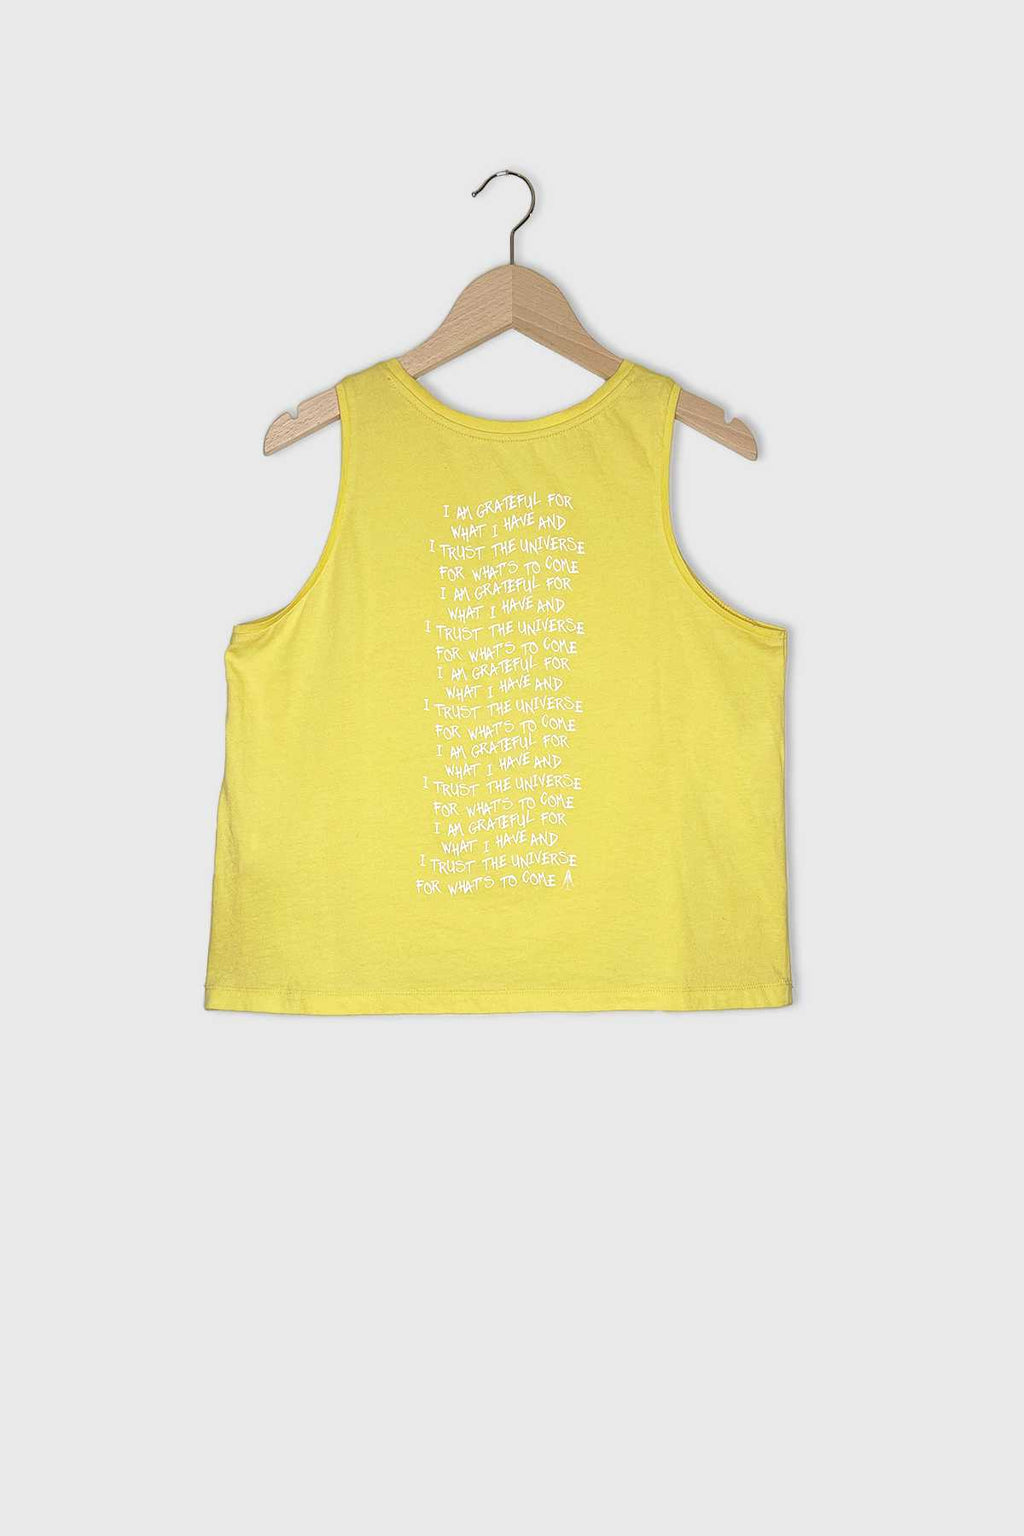 #394 - OMM yellow tank top // Size S YUJ - House of Mindfulness